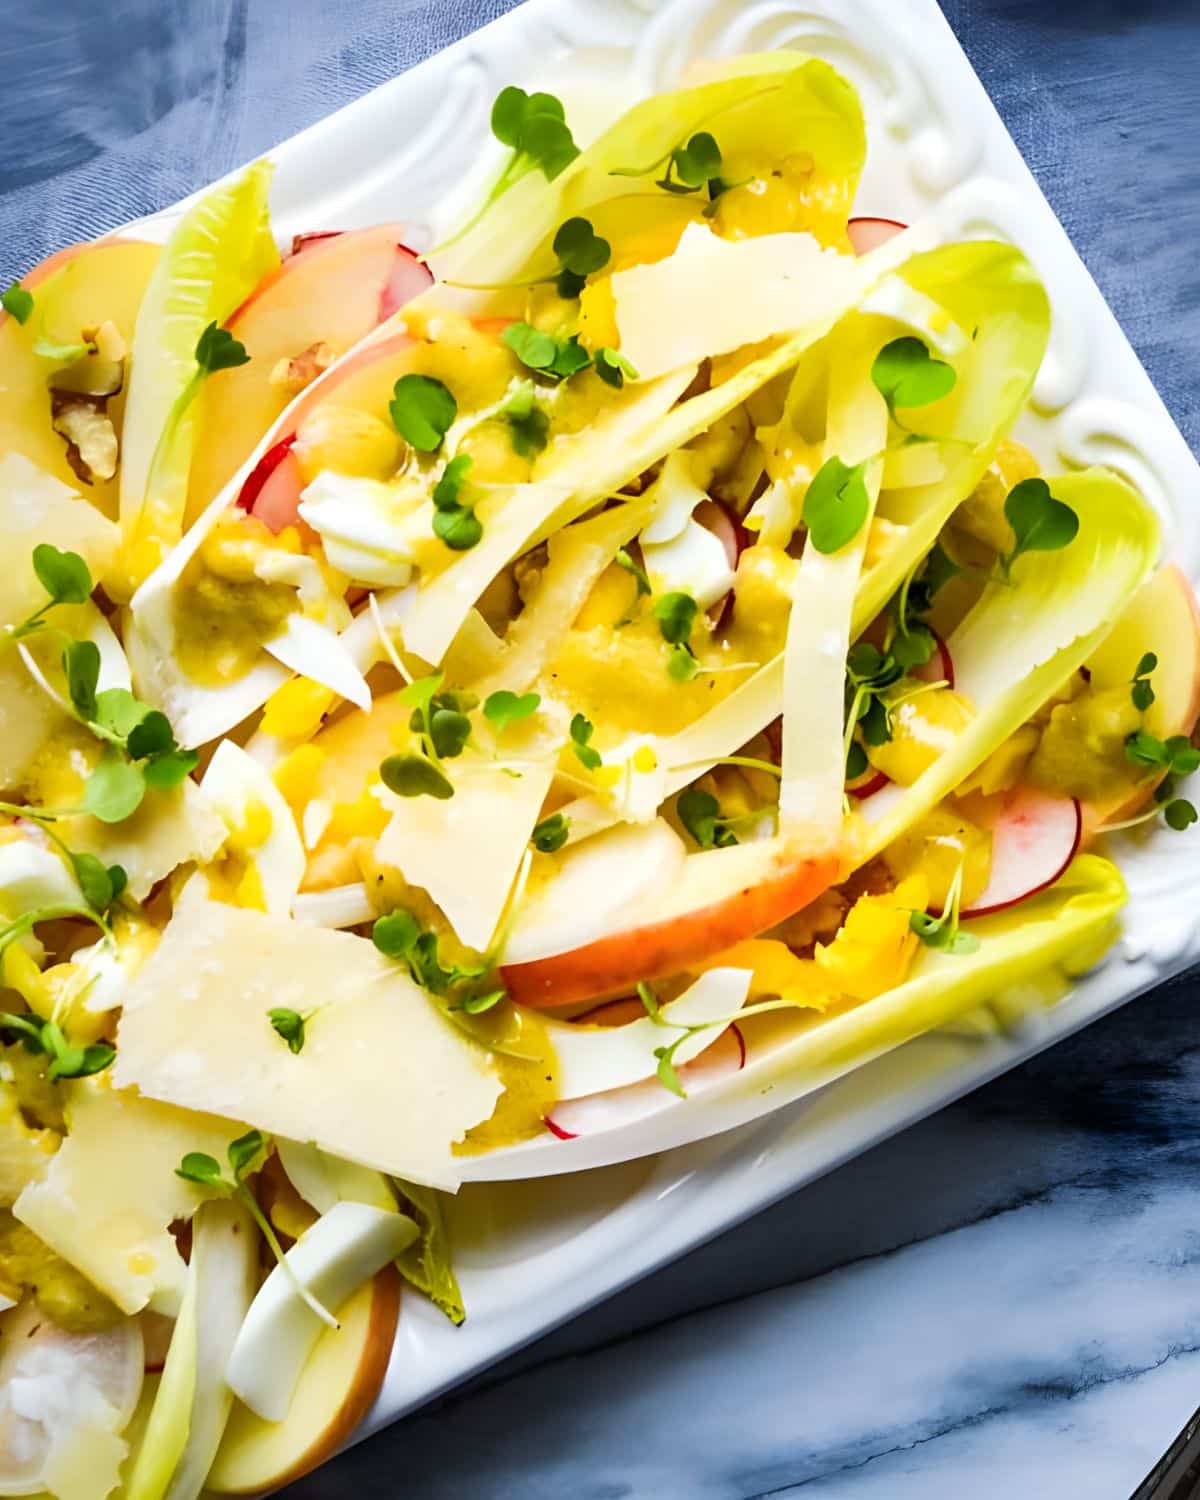 Endive salad with apples, and walnuts.